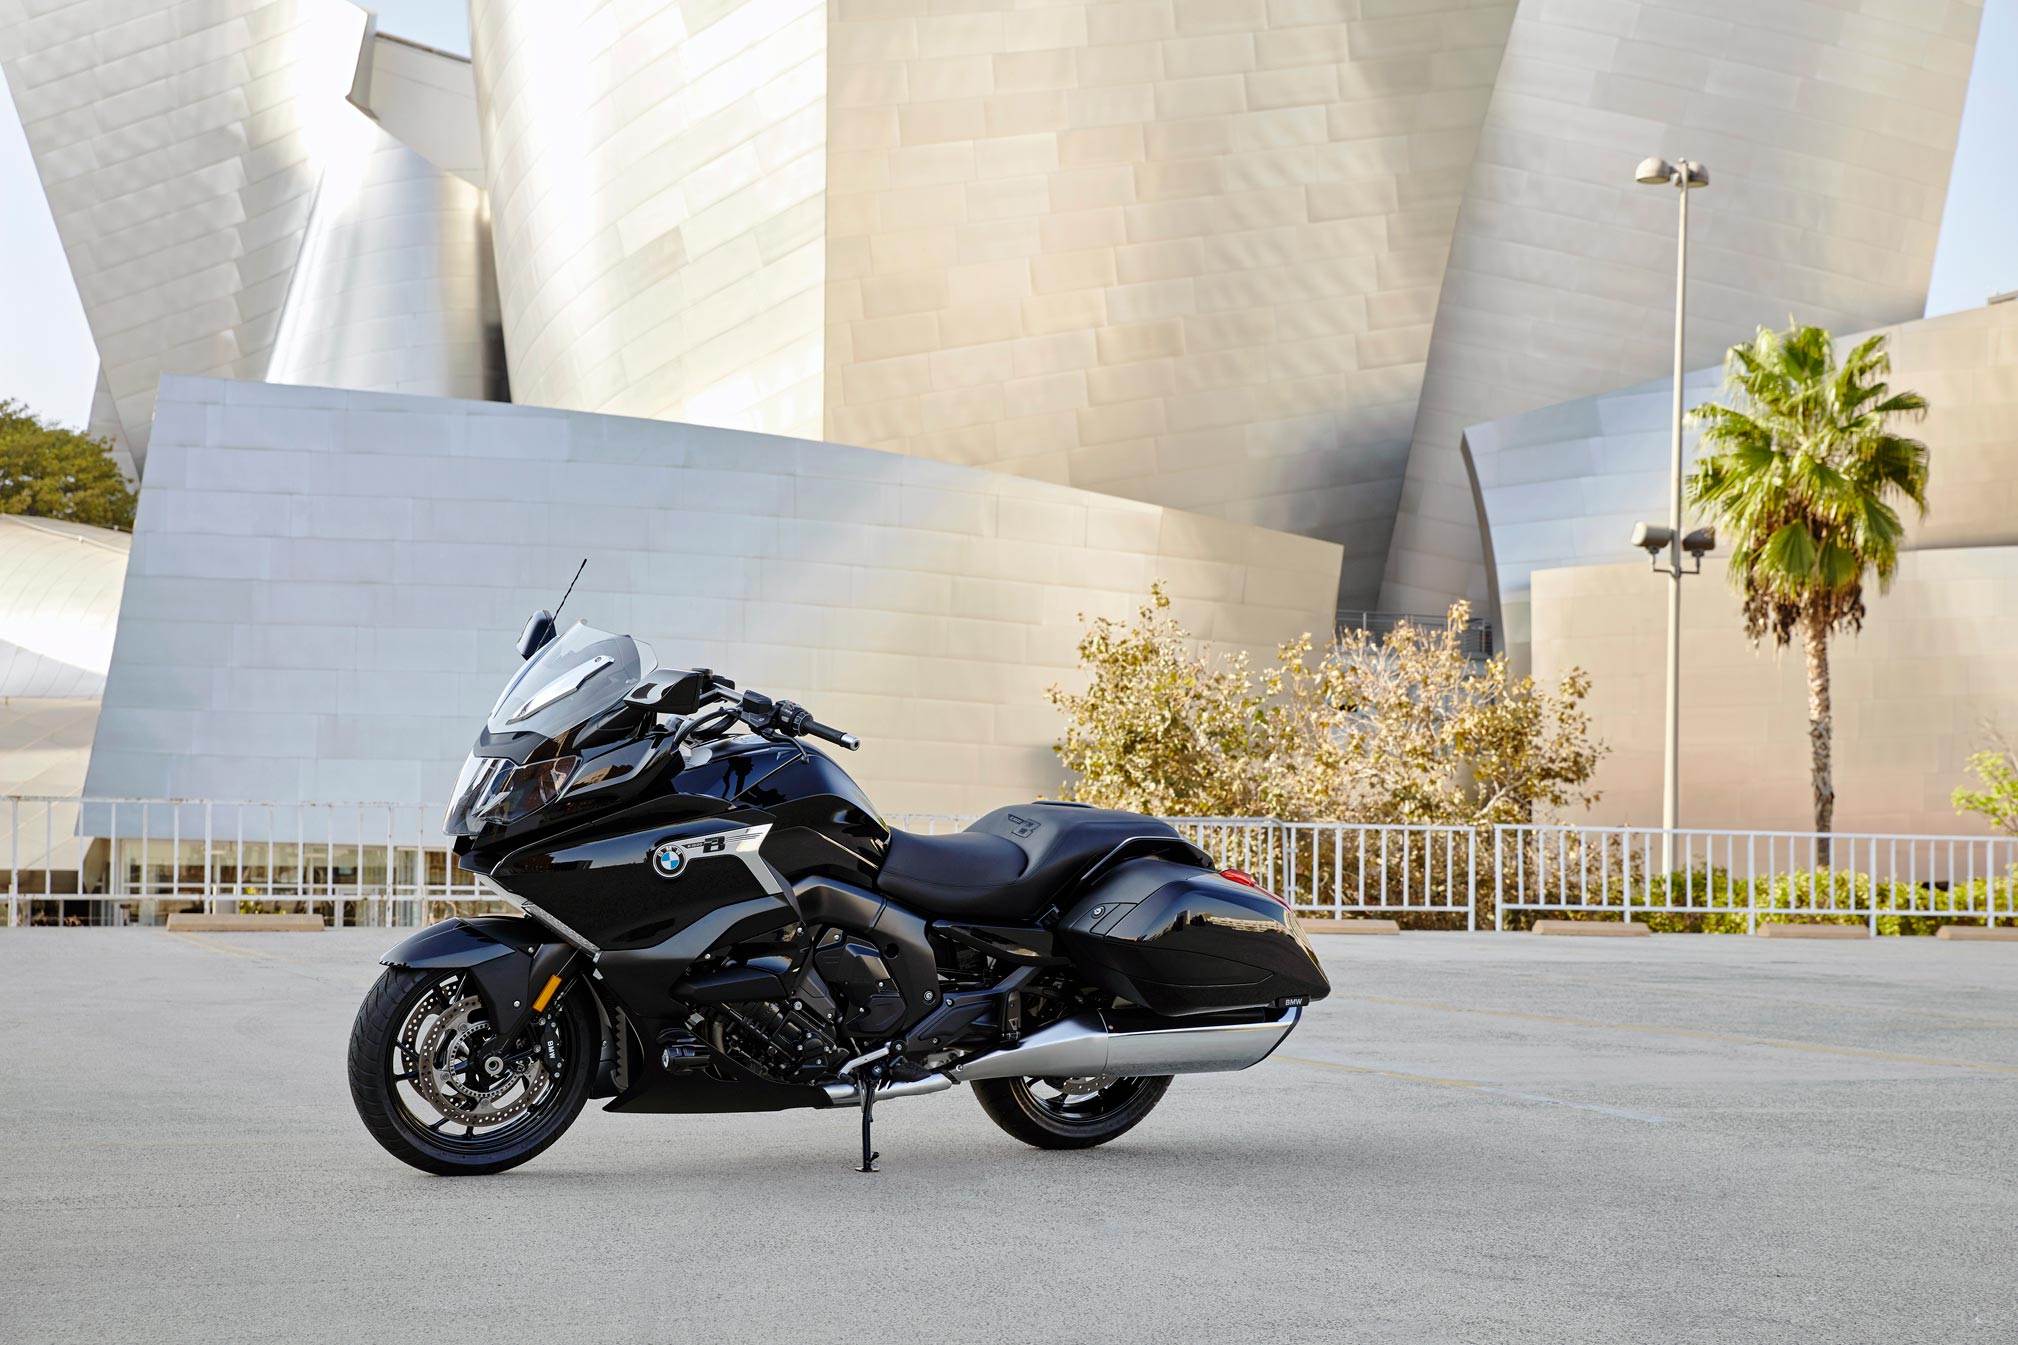 BMW Motorrad USA Heads To SEMA Show Looking For Adventure • Total